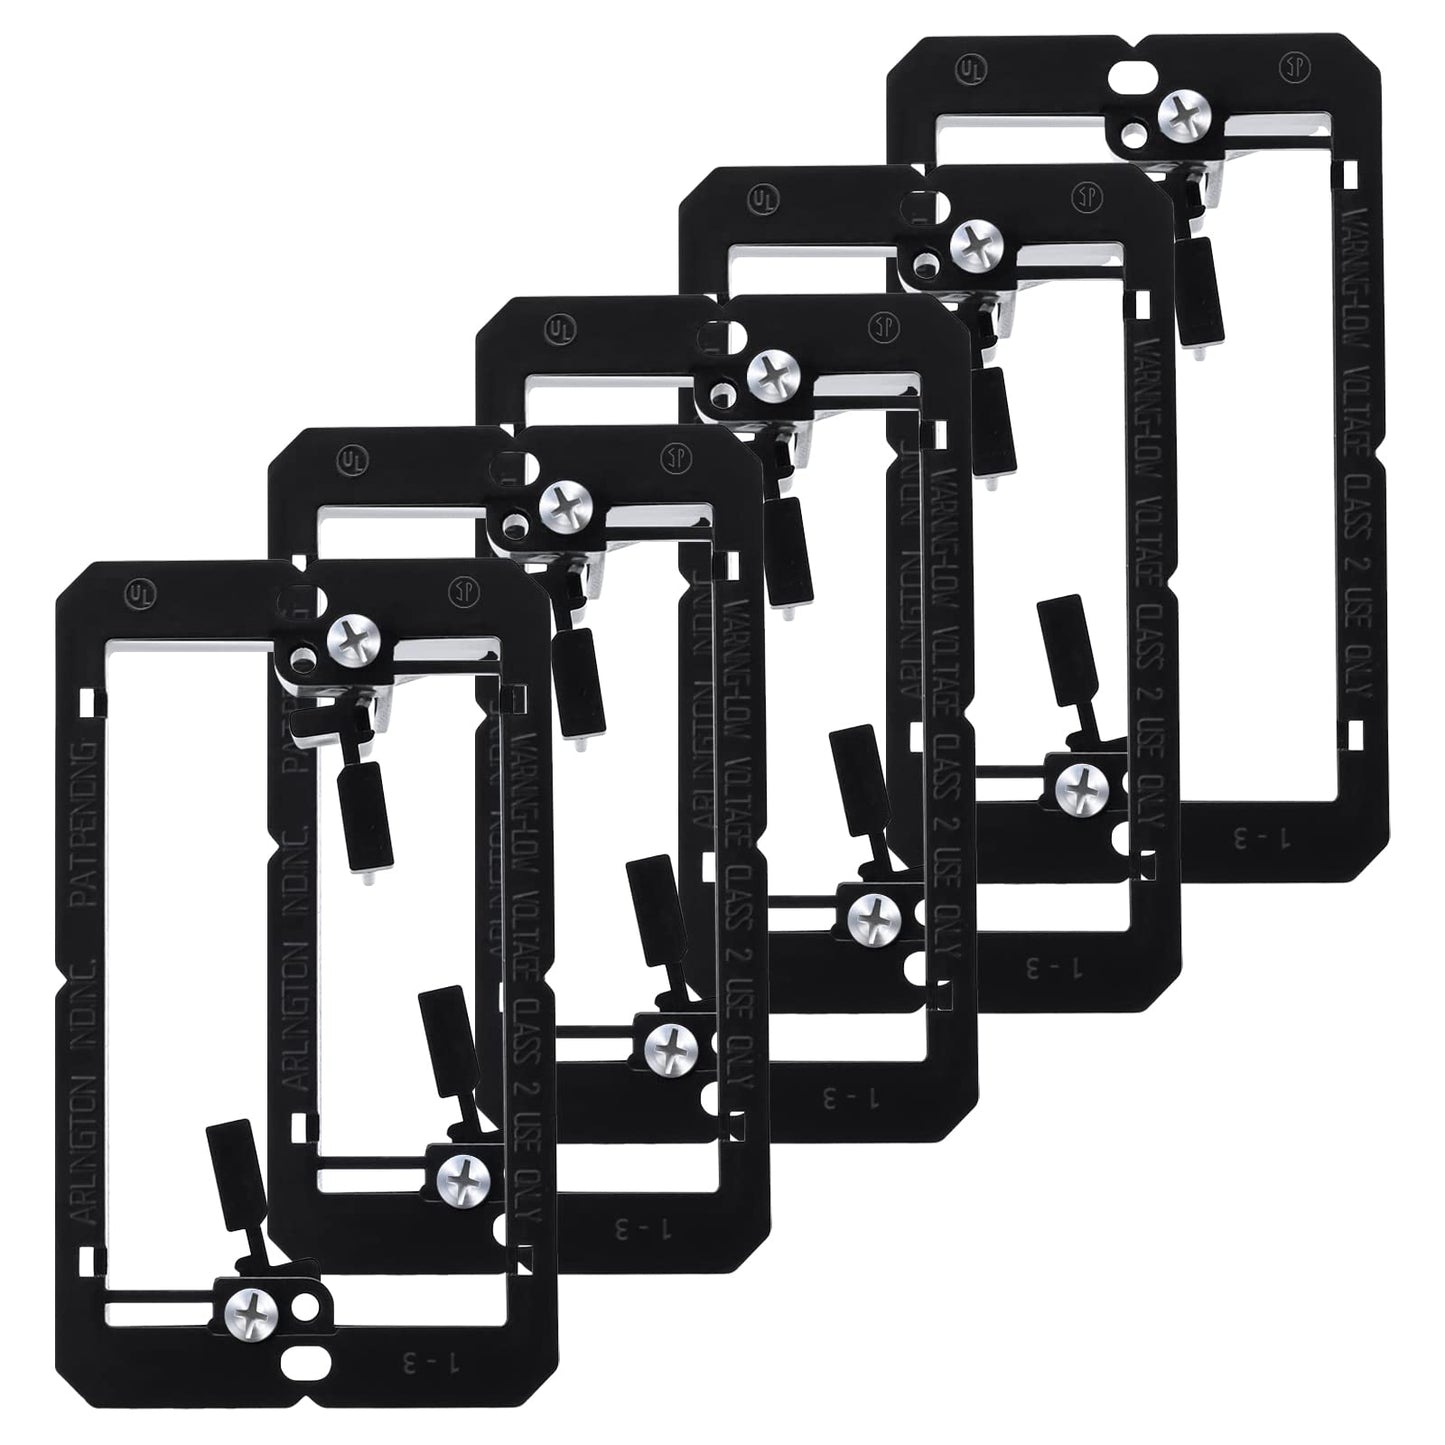 5PCS Low Voltage Mounting Bracket, Elecpow Single Gang Wall Plate Low Voltage Box for Telephone Wires, Network Cables, HDMI, Coaxial, Speaker Cables-Black